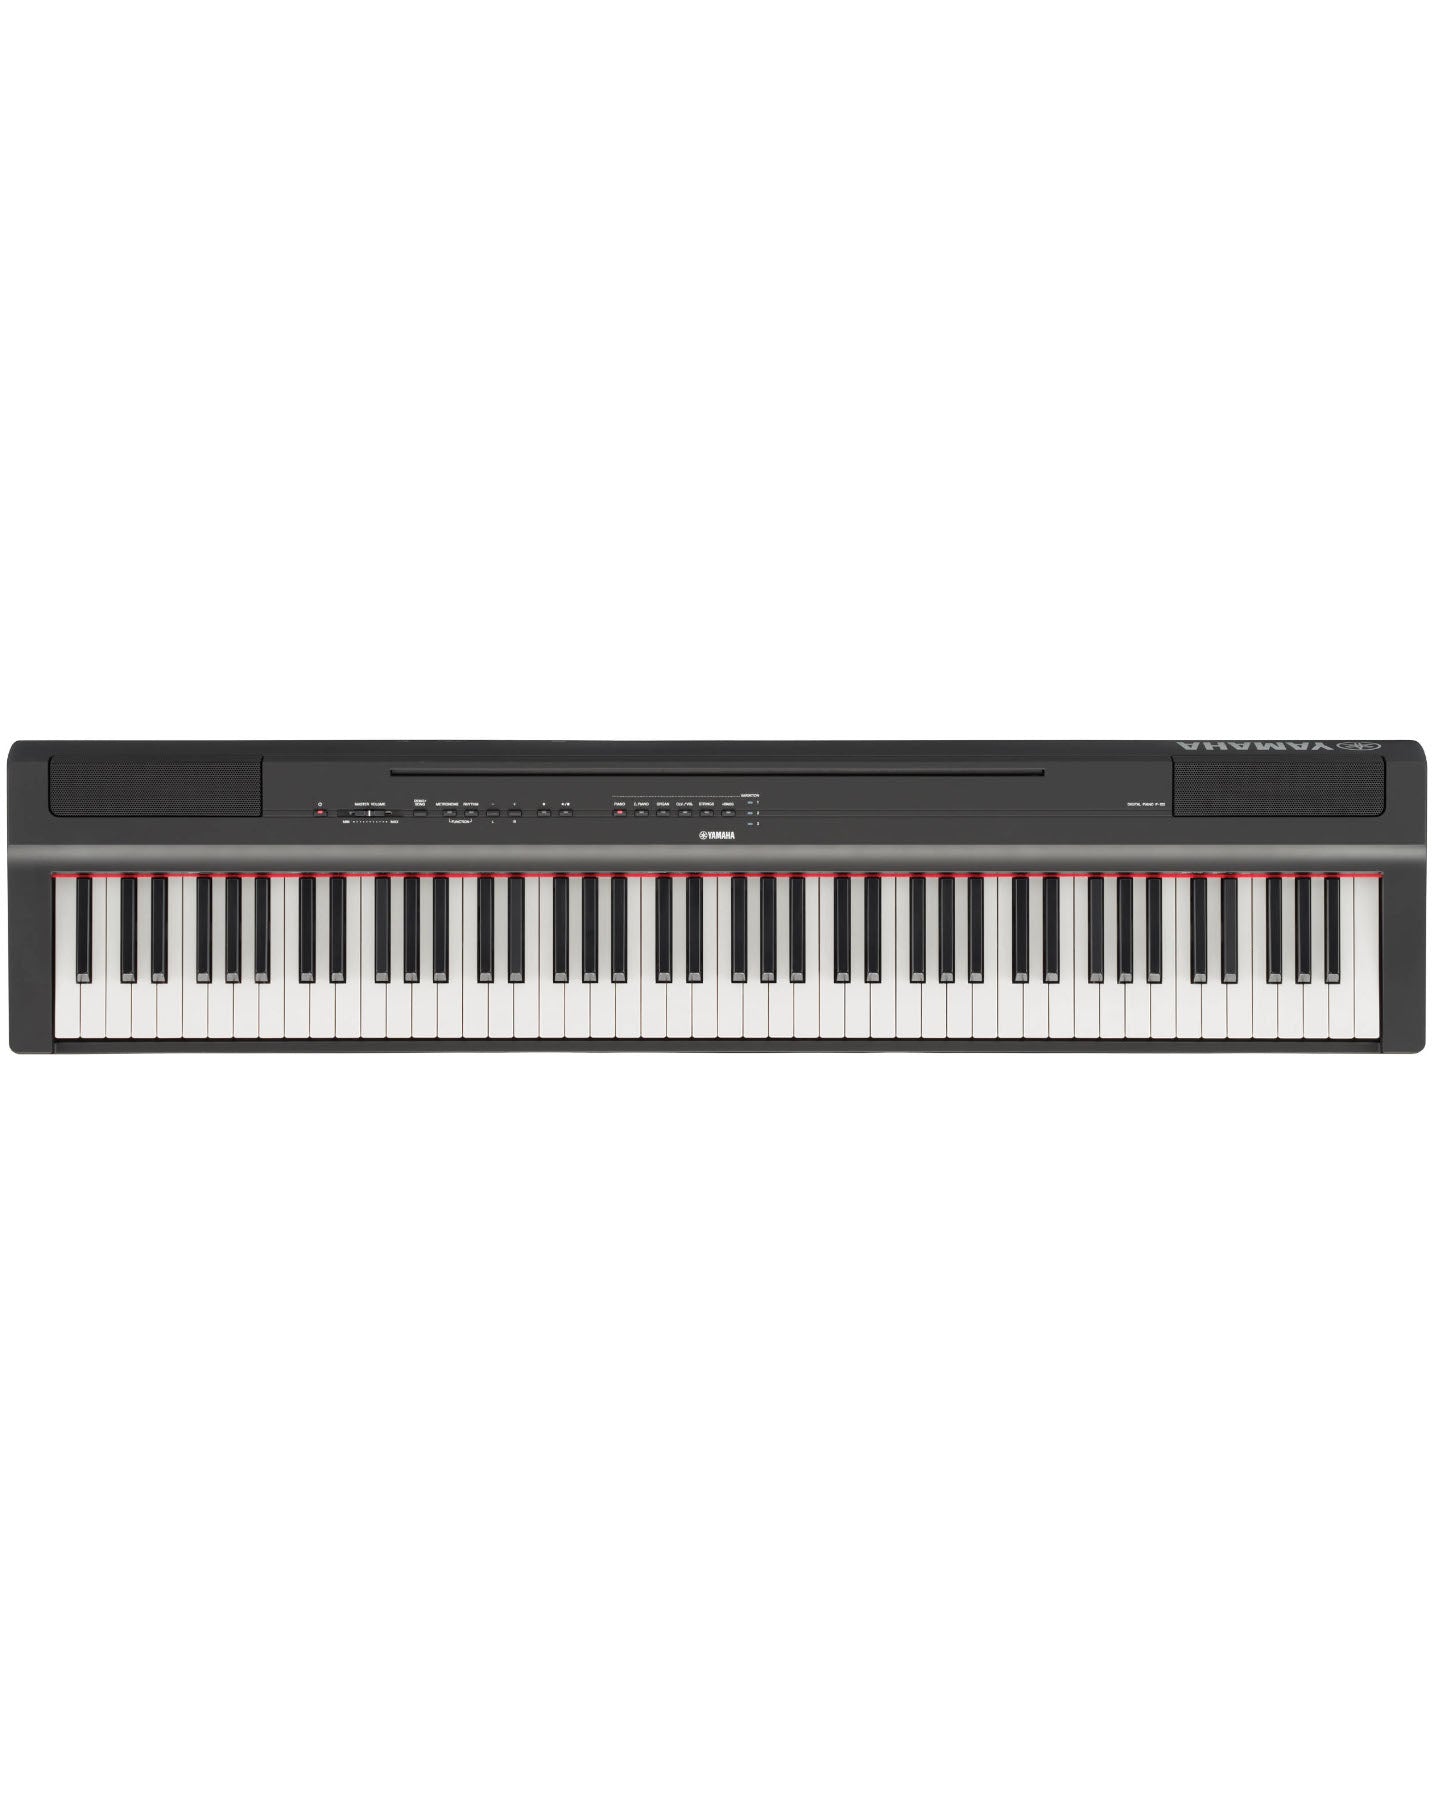 P-125B 88-Key Weighted Action Digital Piano, Black